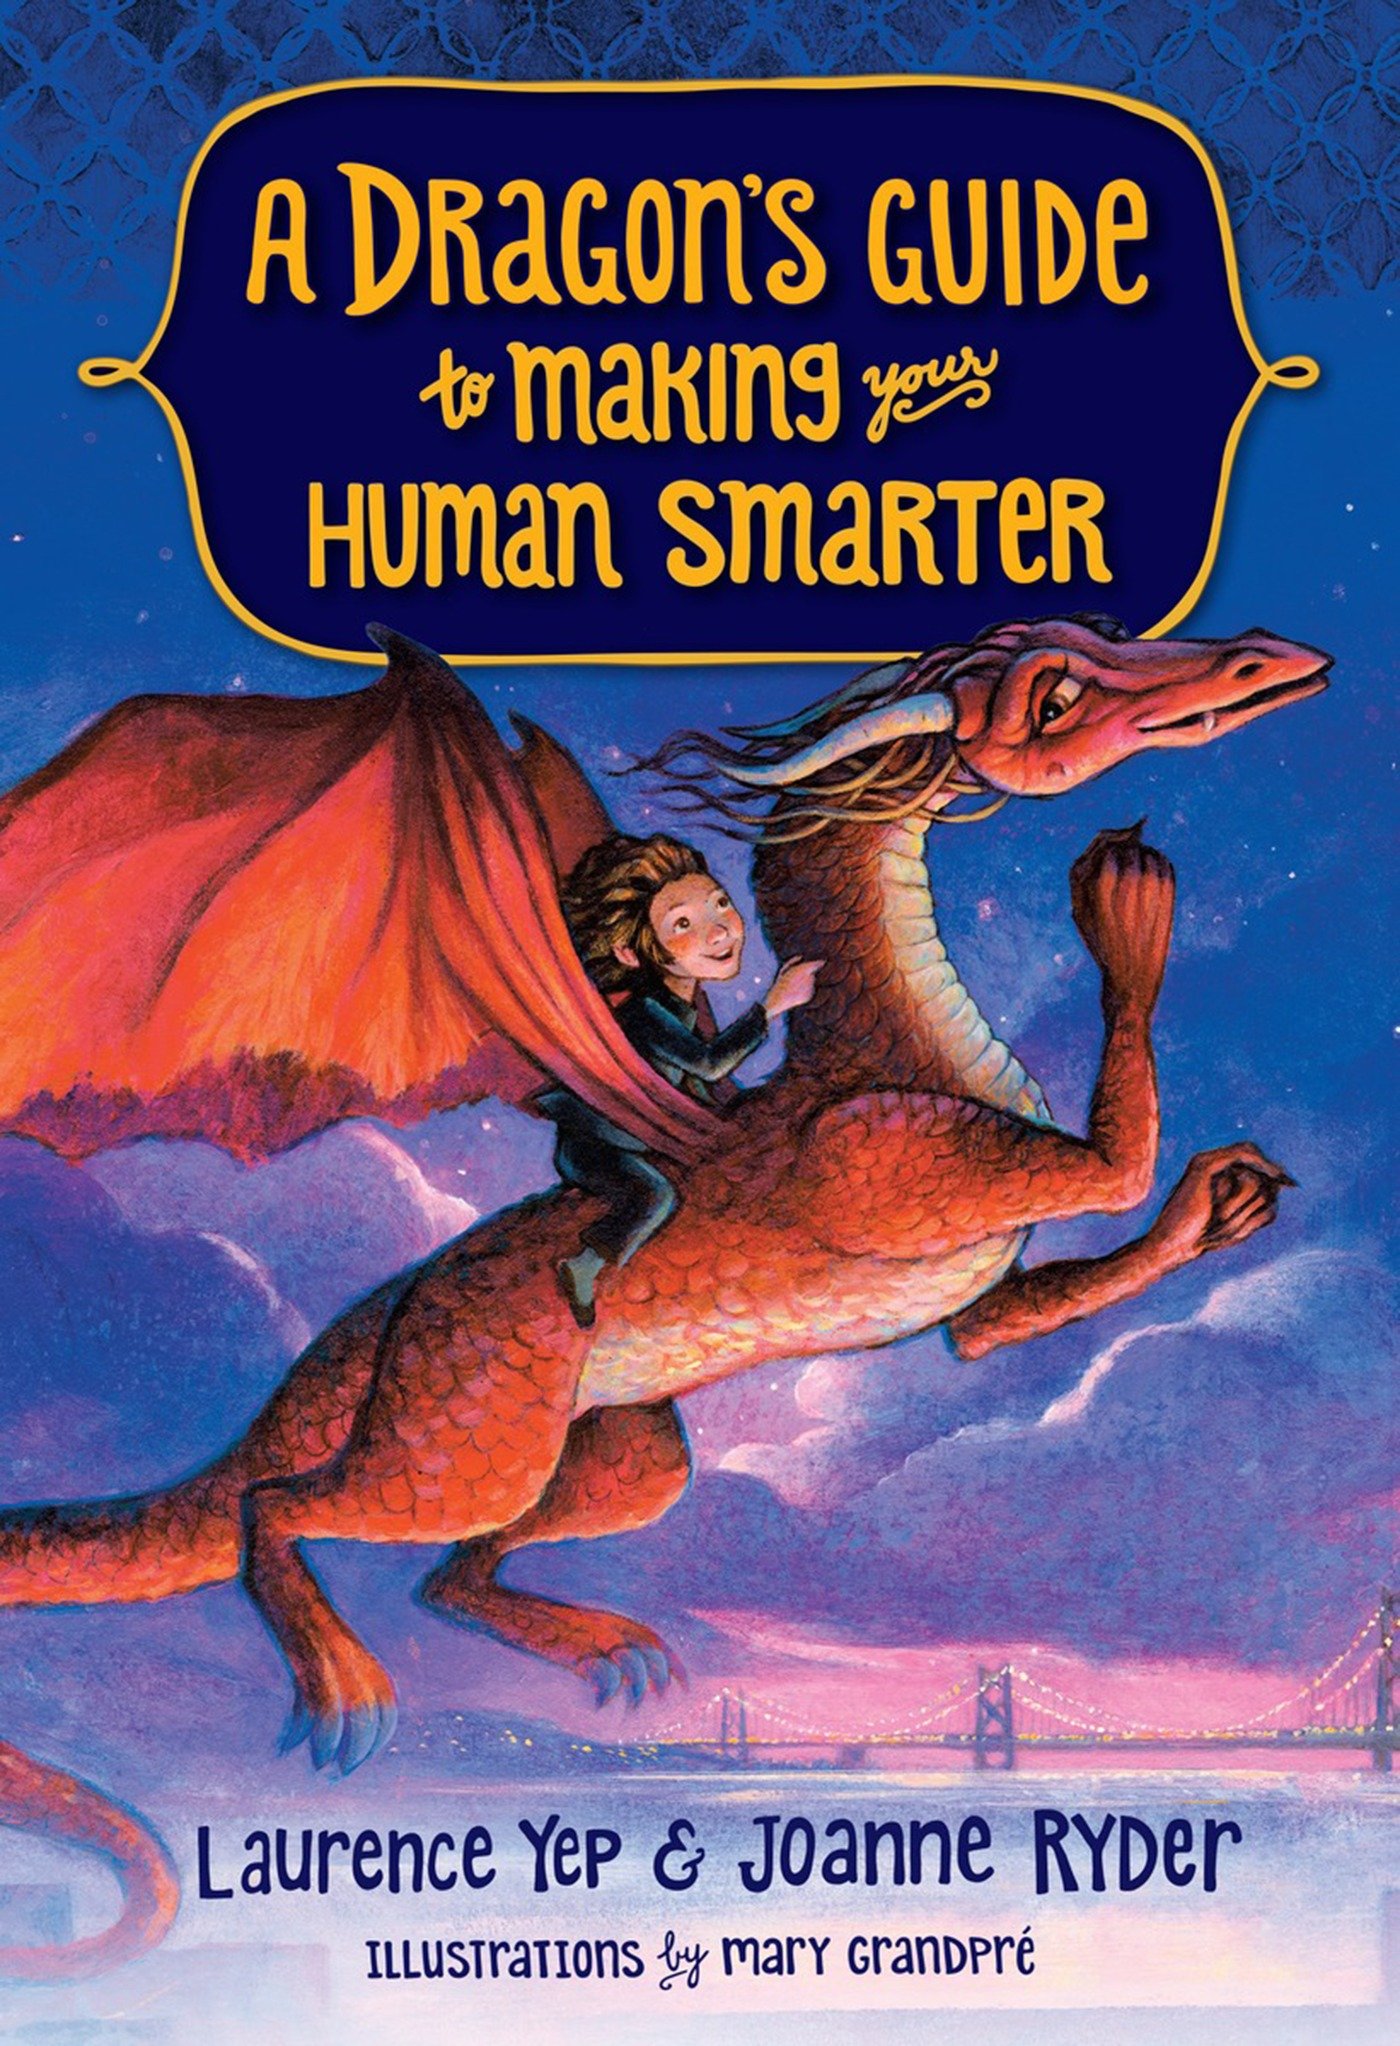 A Dragon's Guide Volume 2 To Making Your Human Smarter